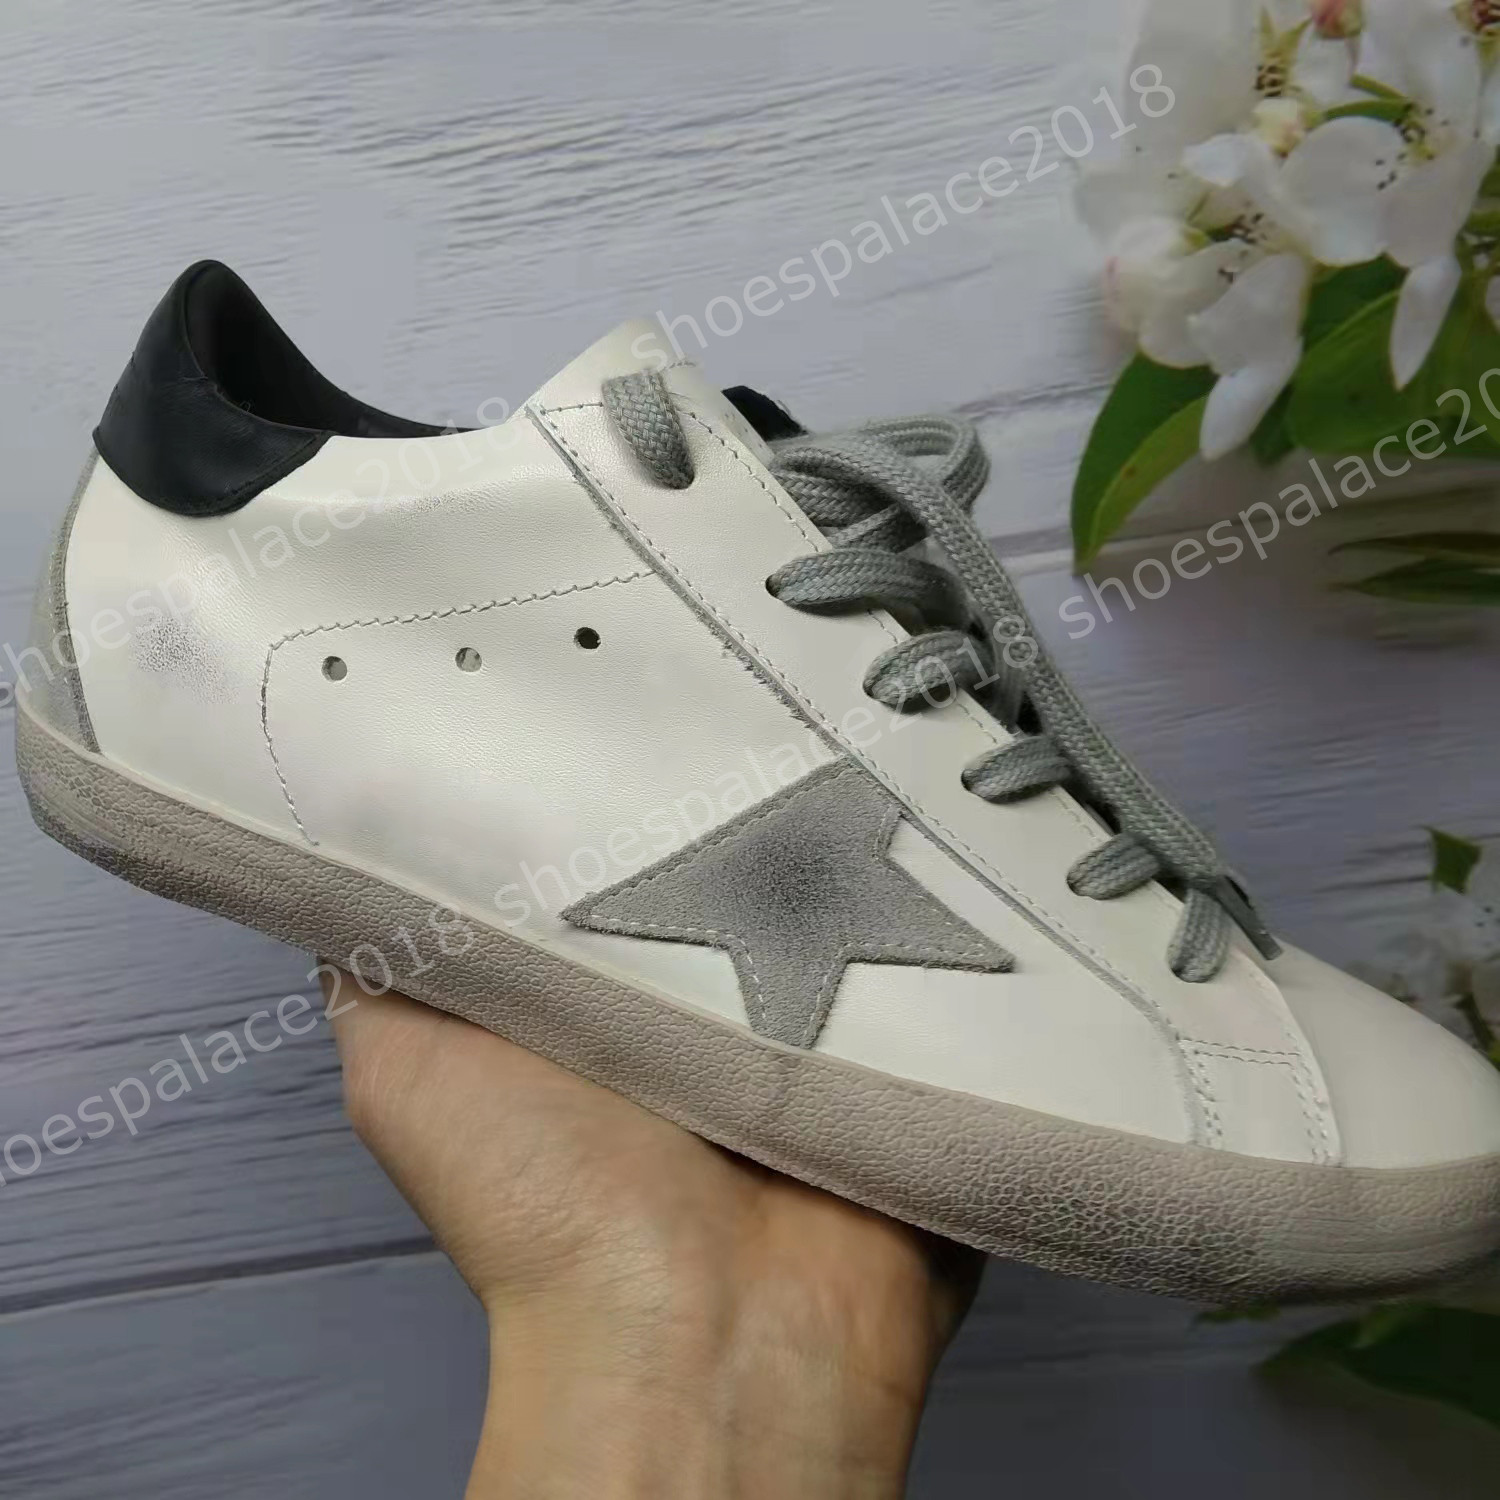 

cozy Mens Womens Casual Shoes Fashion Platform Sneakers scarpe Flat Soft Leather Chaussures Lady Leisure Leopard Old Dirty glitter White Trainers Velvet Tennis, Color03